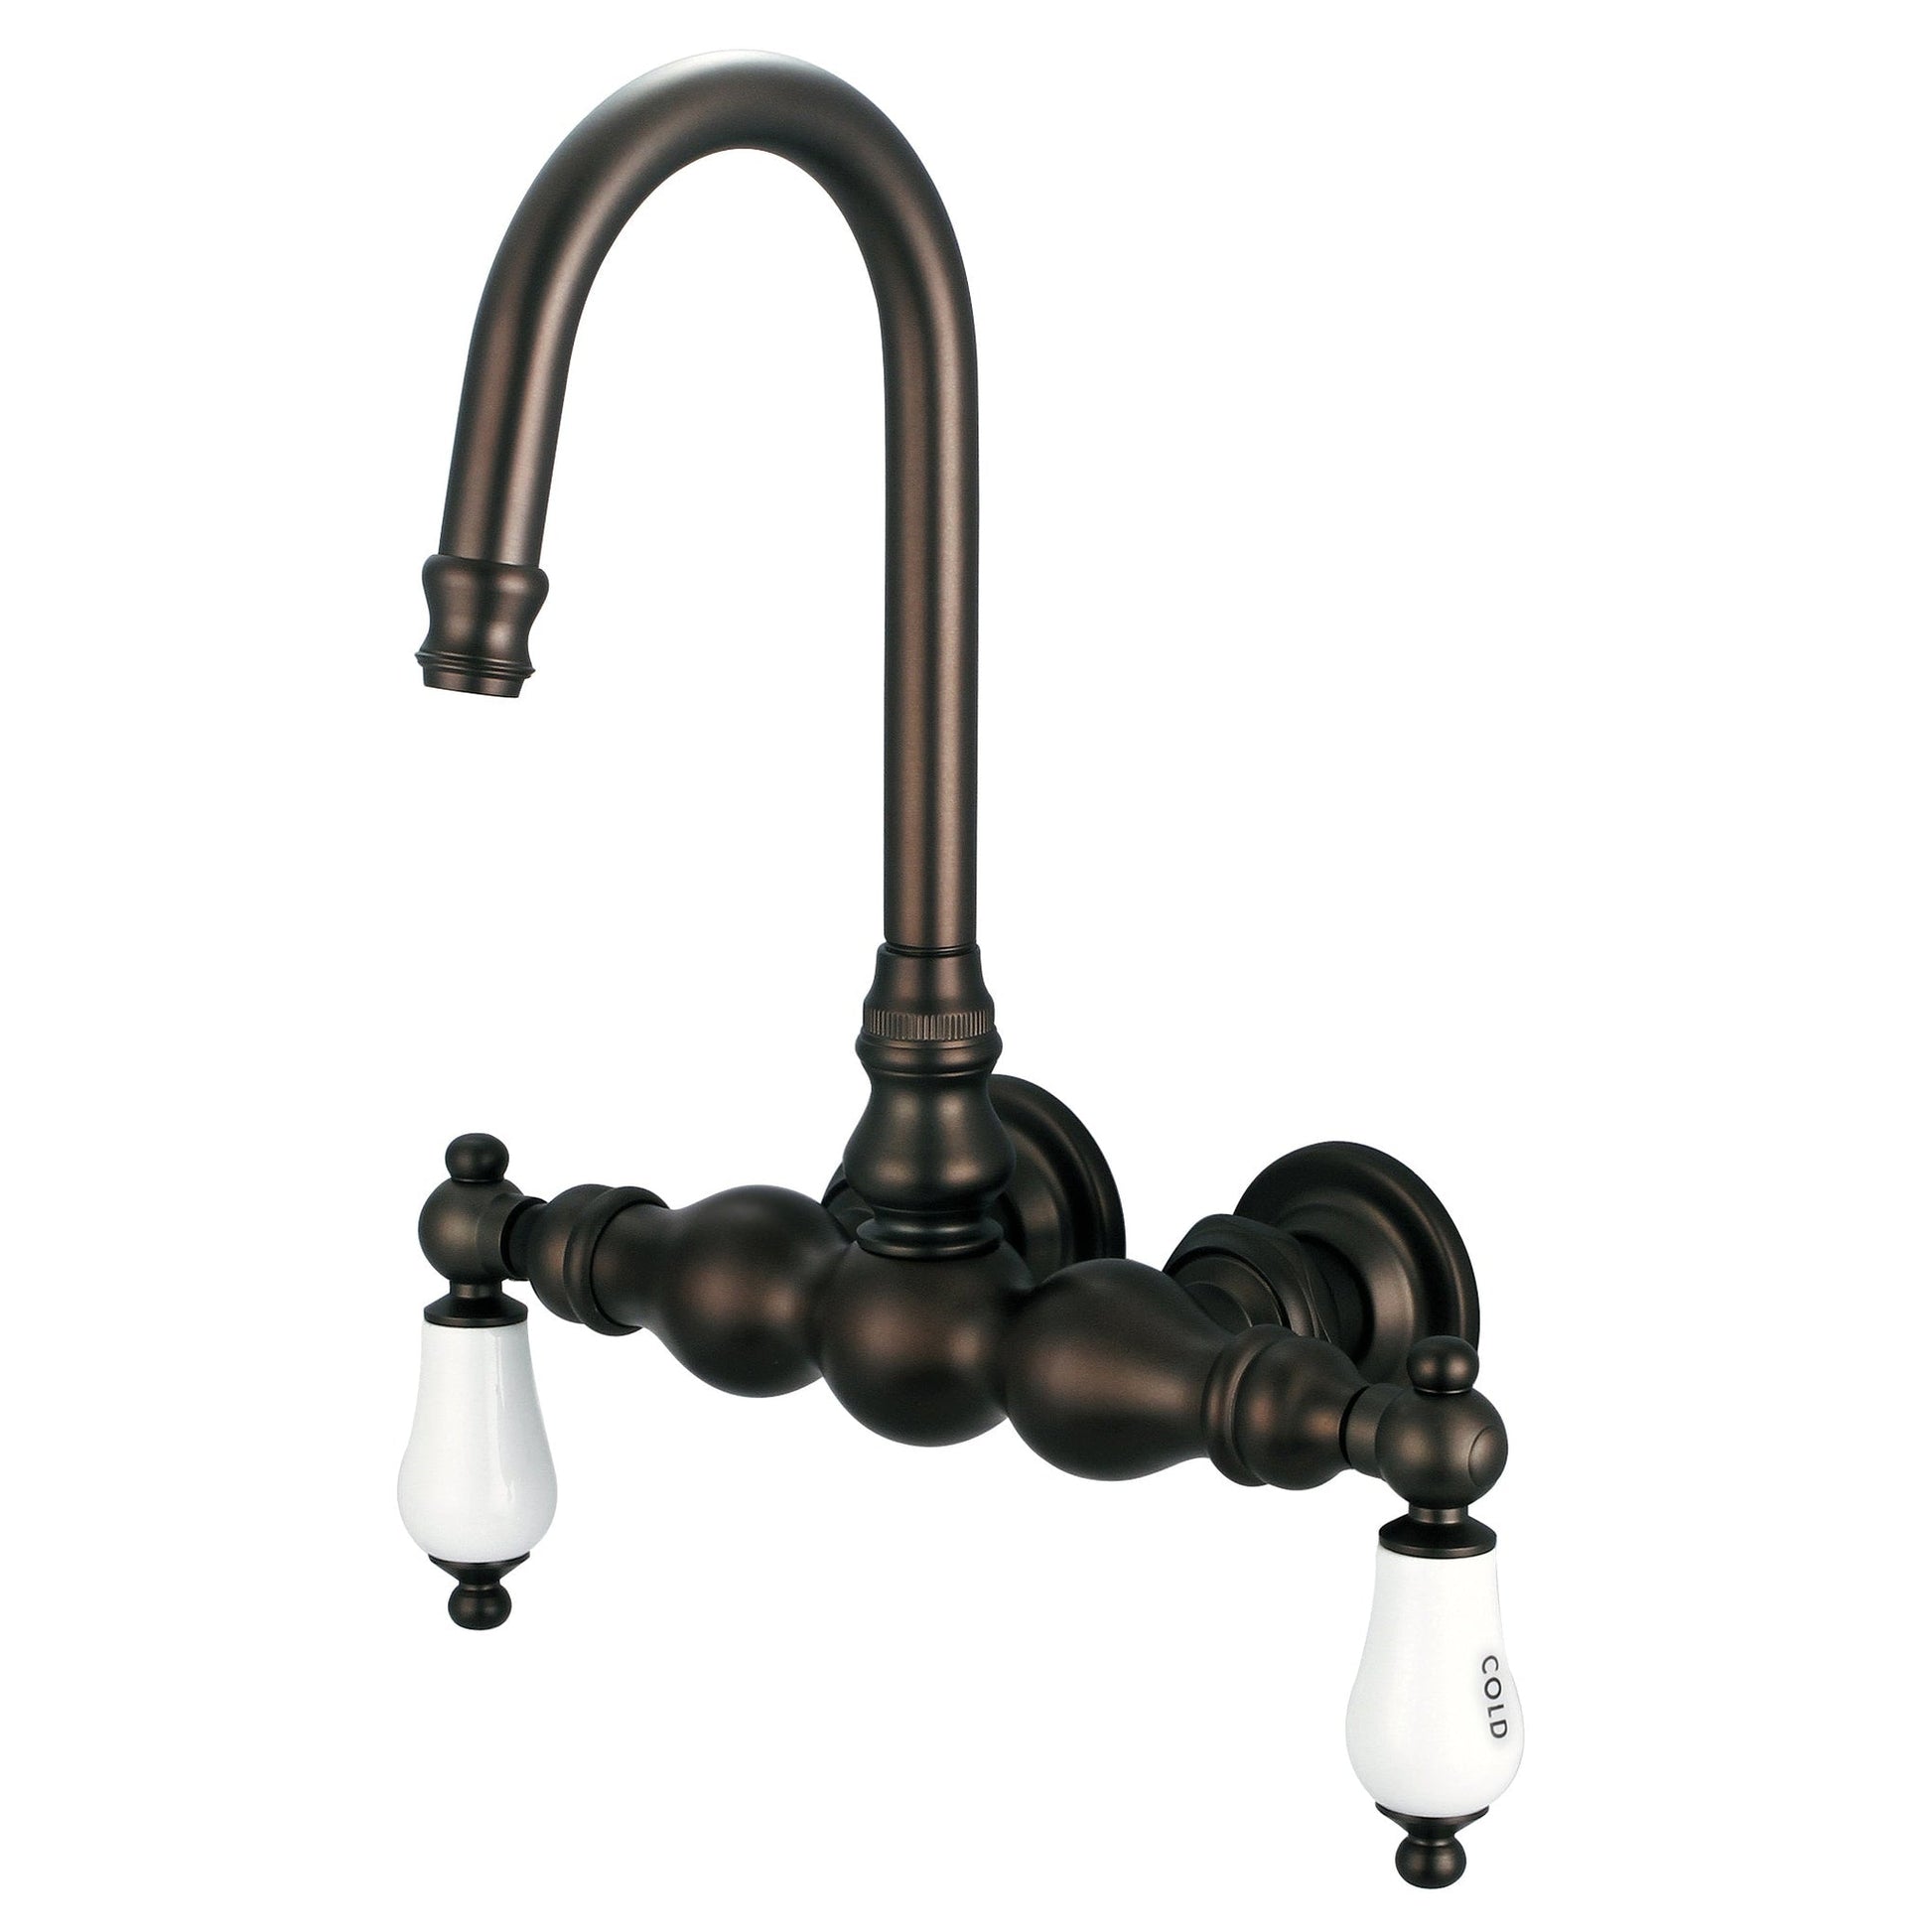 Water Creation Vintage Classic Center Wall Mount Tub F6-0014 9.25" Brown Solid Brass Faucet With Gooseneck Spout And Straight Wall Connector And Porcelain Lever Handles, Hot And Cold Labels Included